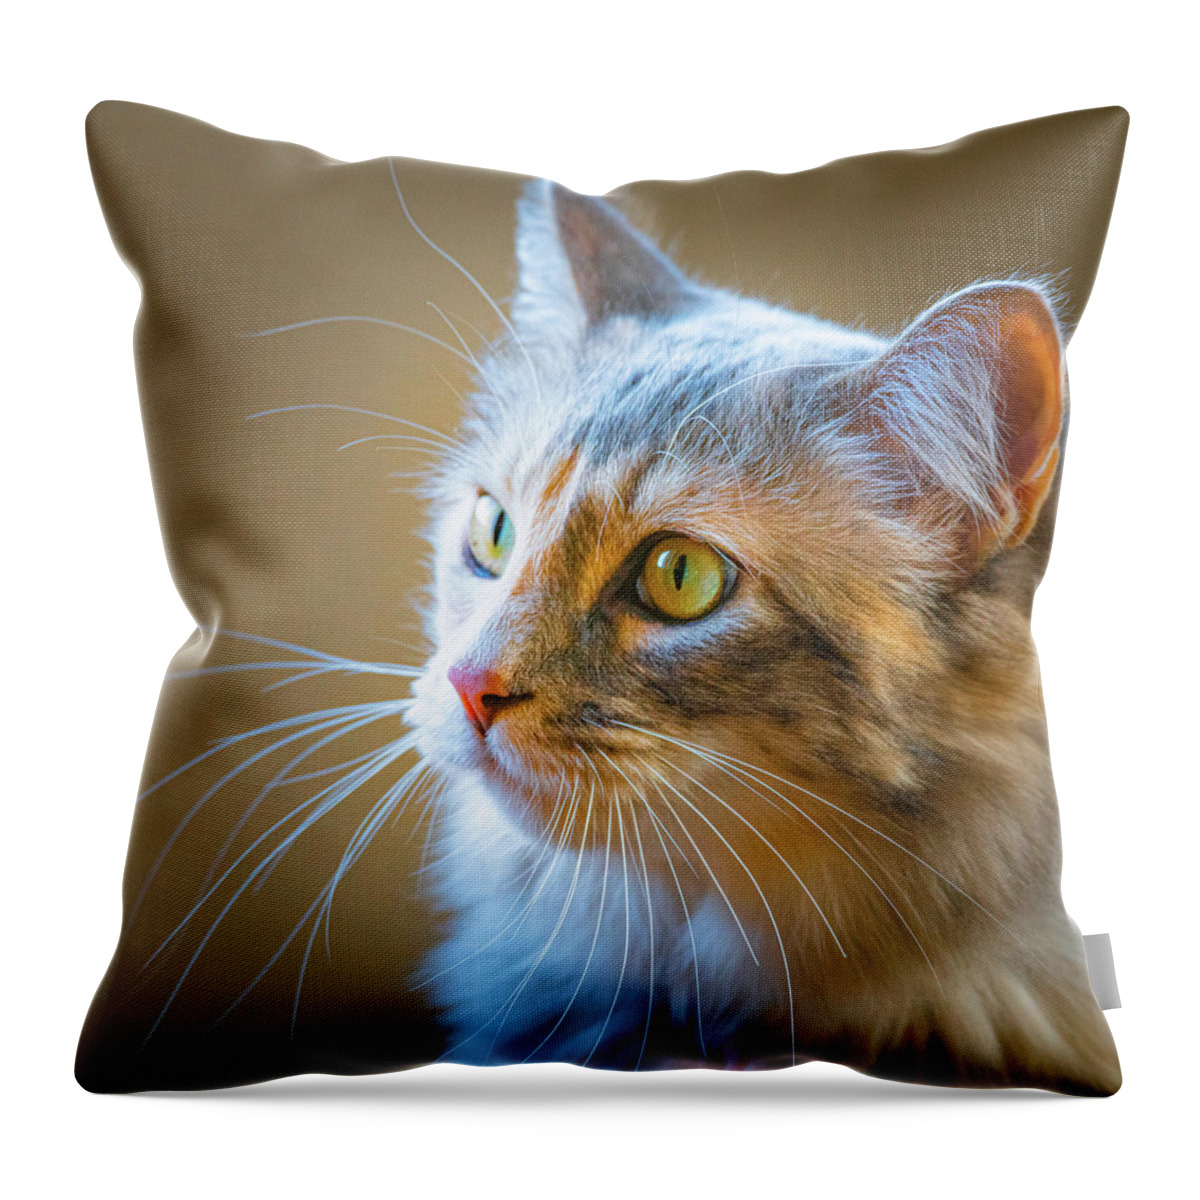 Cat Throw Pillow featuring the photograph Sweet Maya by Janis Knight